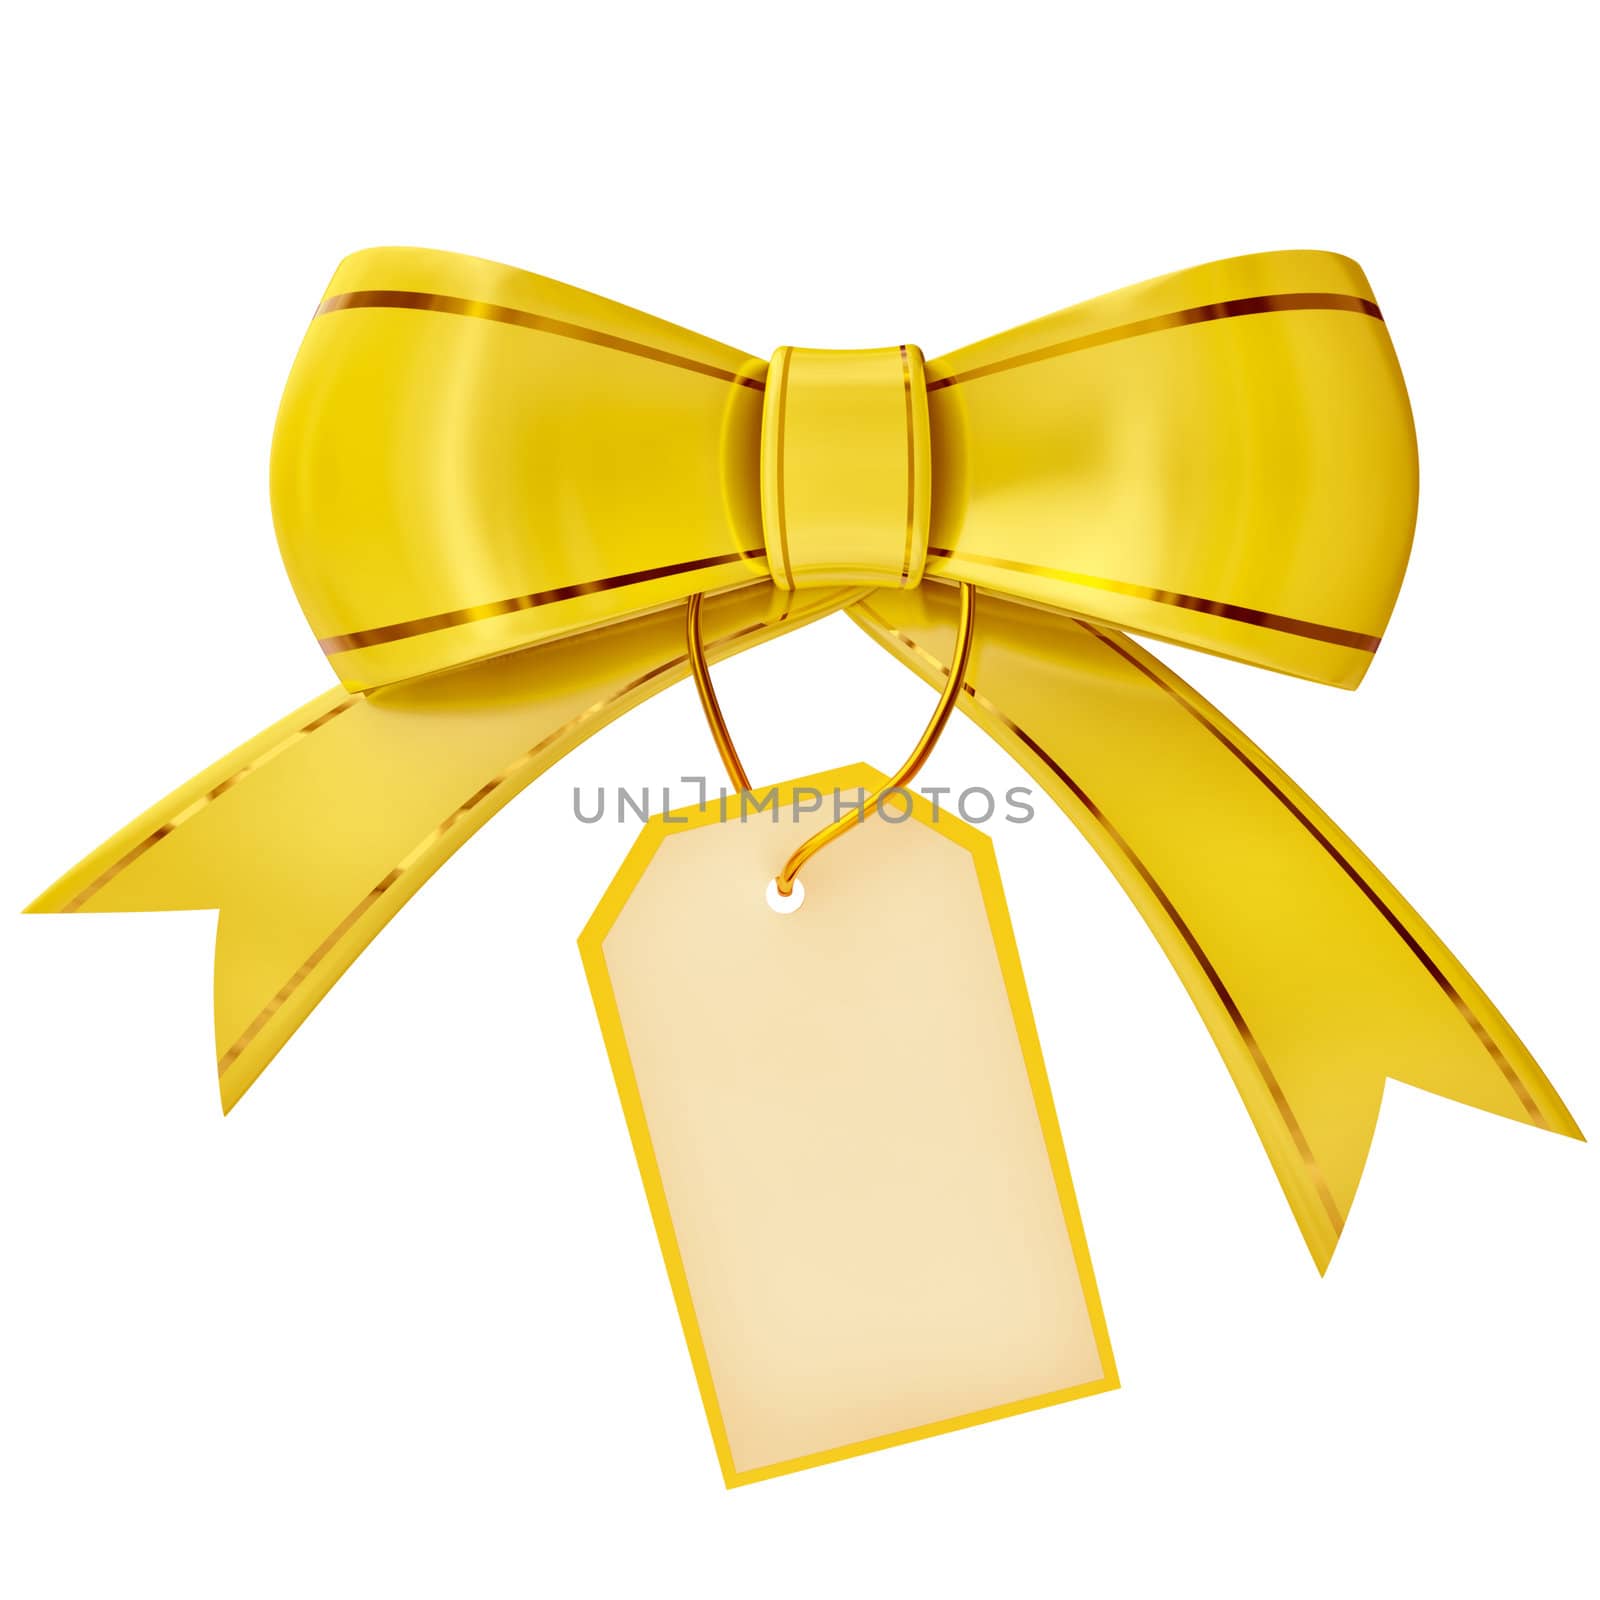 yellow Christmas bow with label on white background